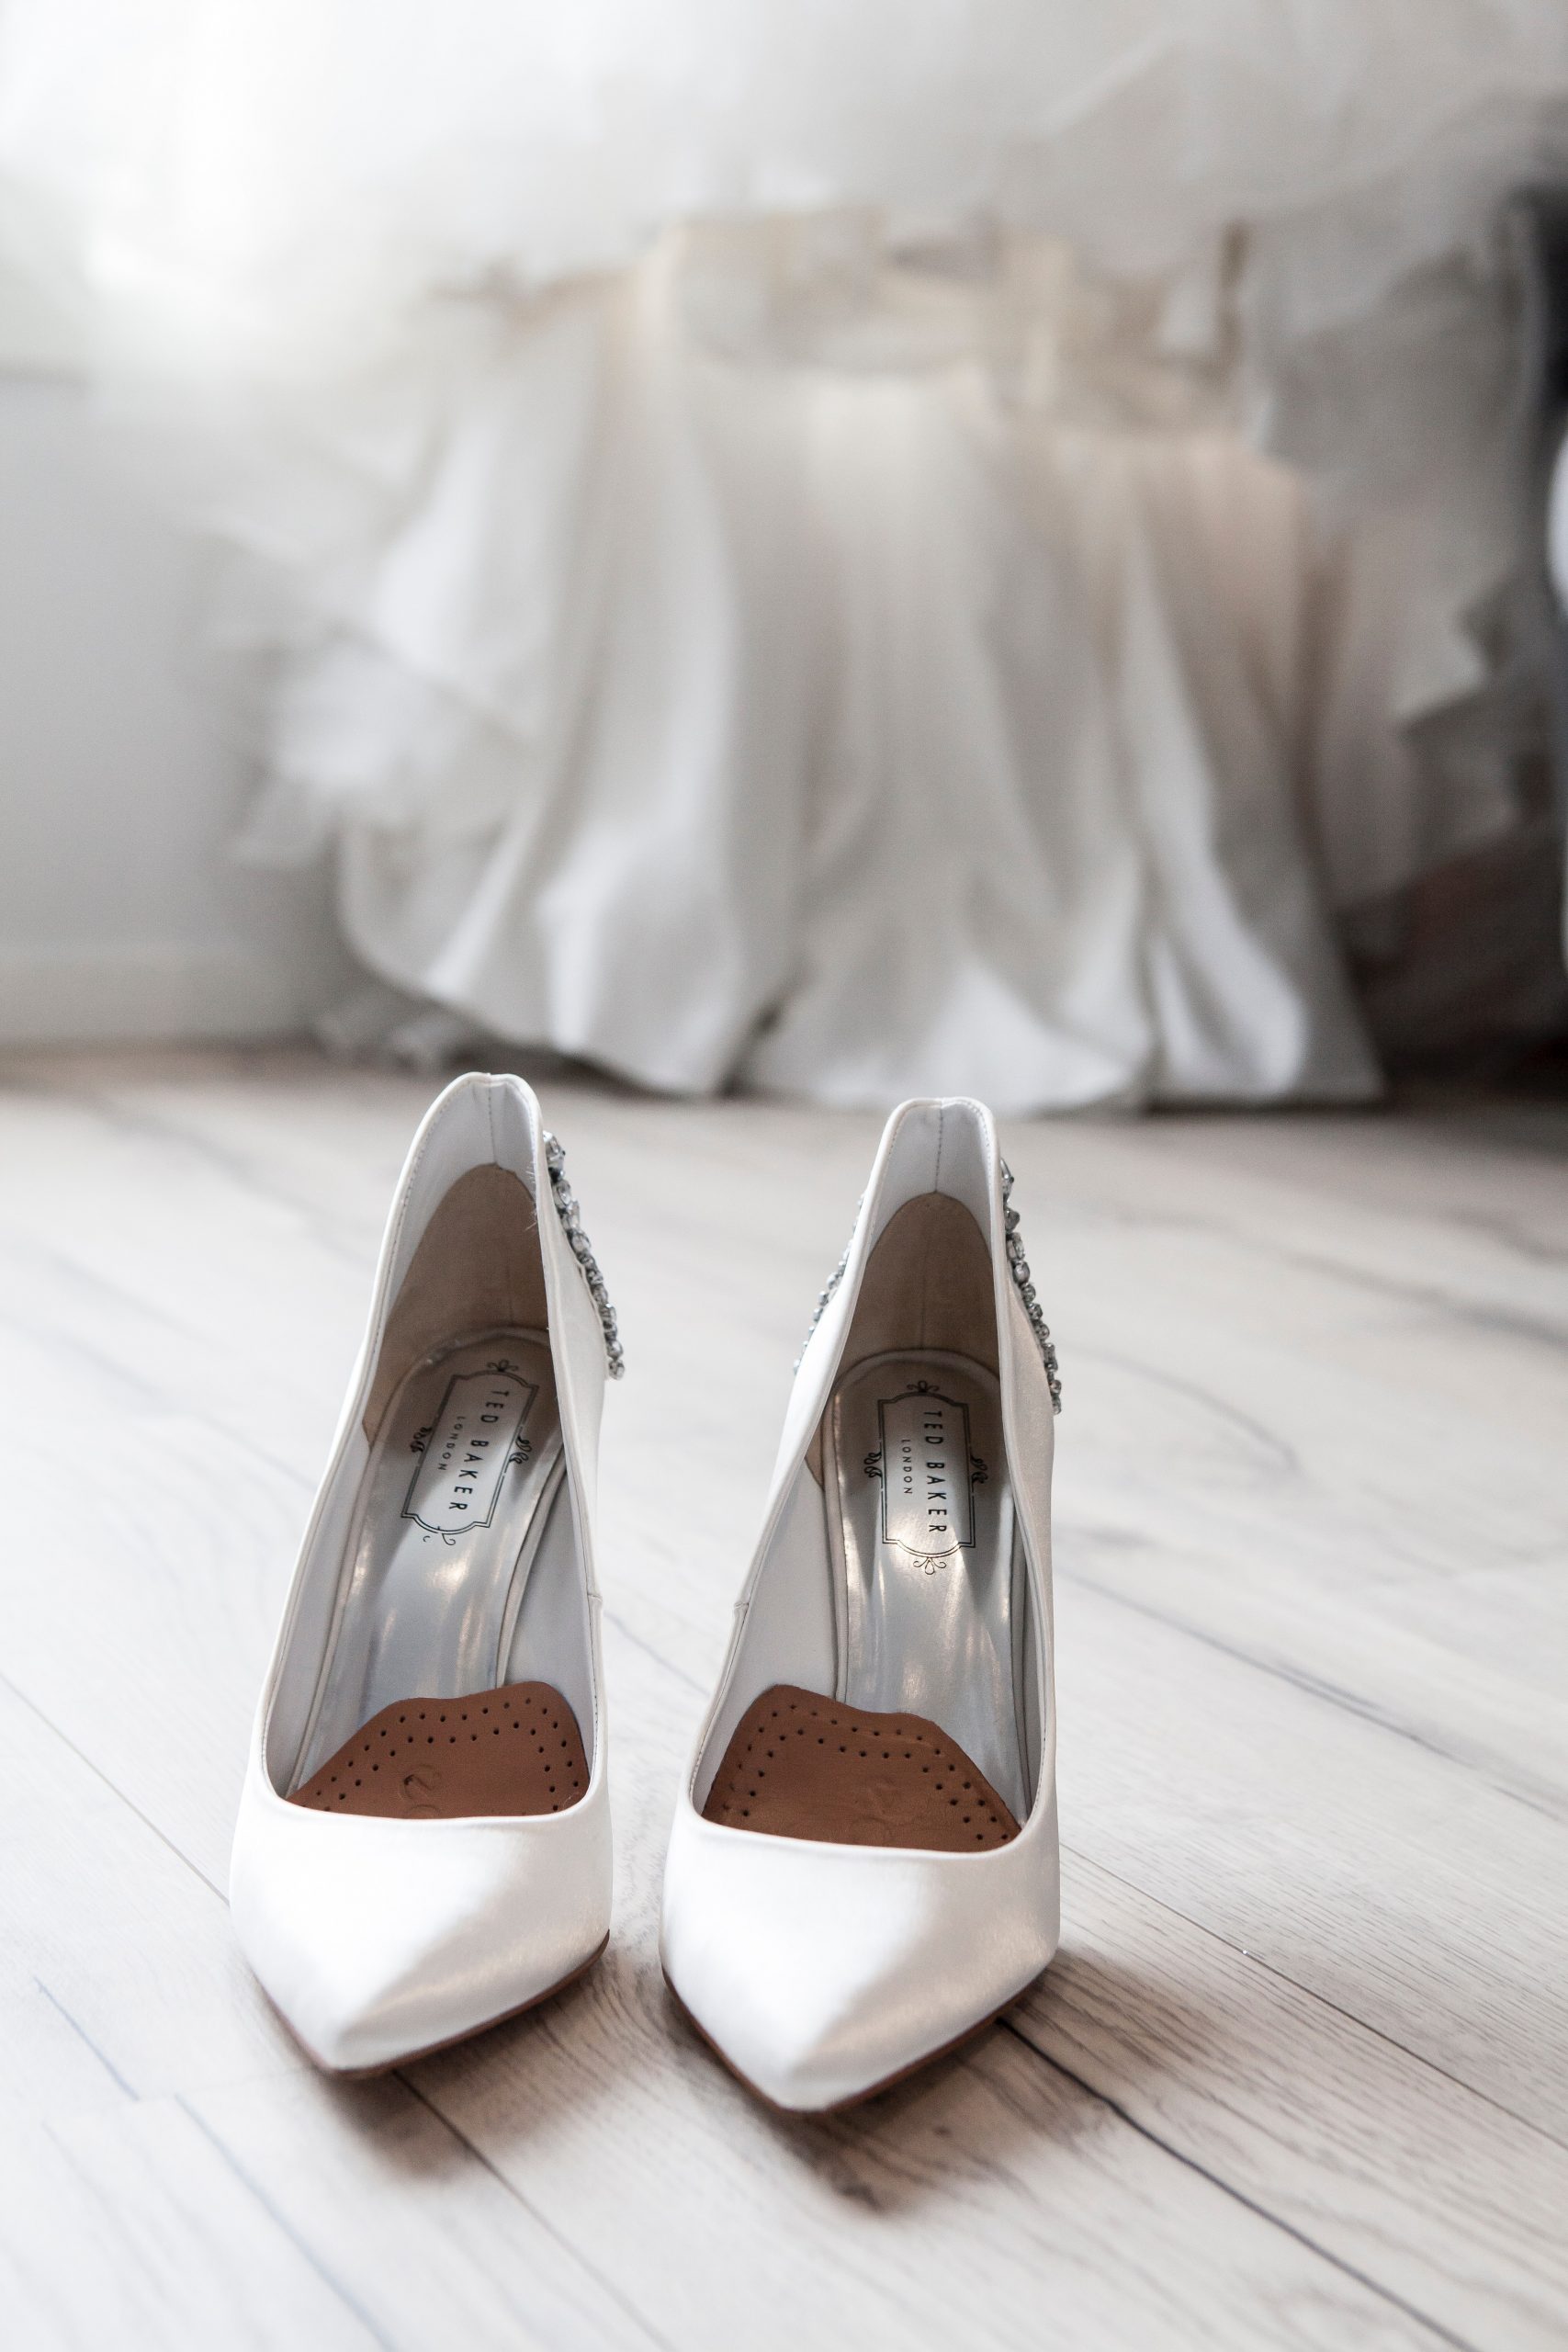 Shoes for the bride – how to match them with the wedding dress?